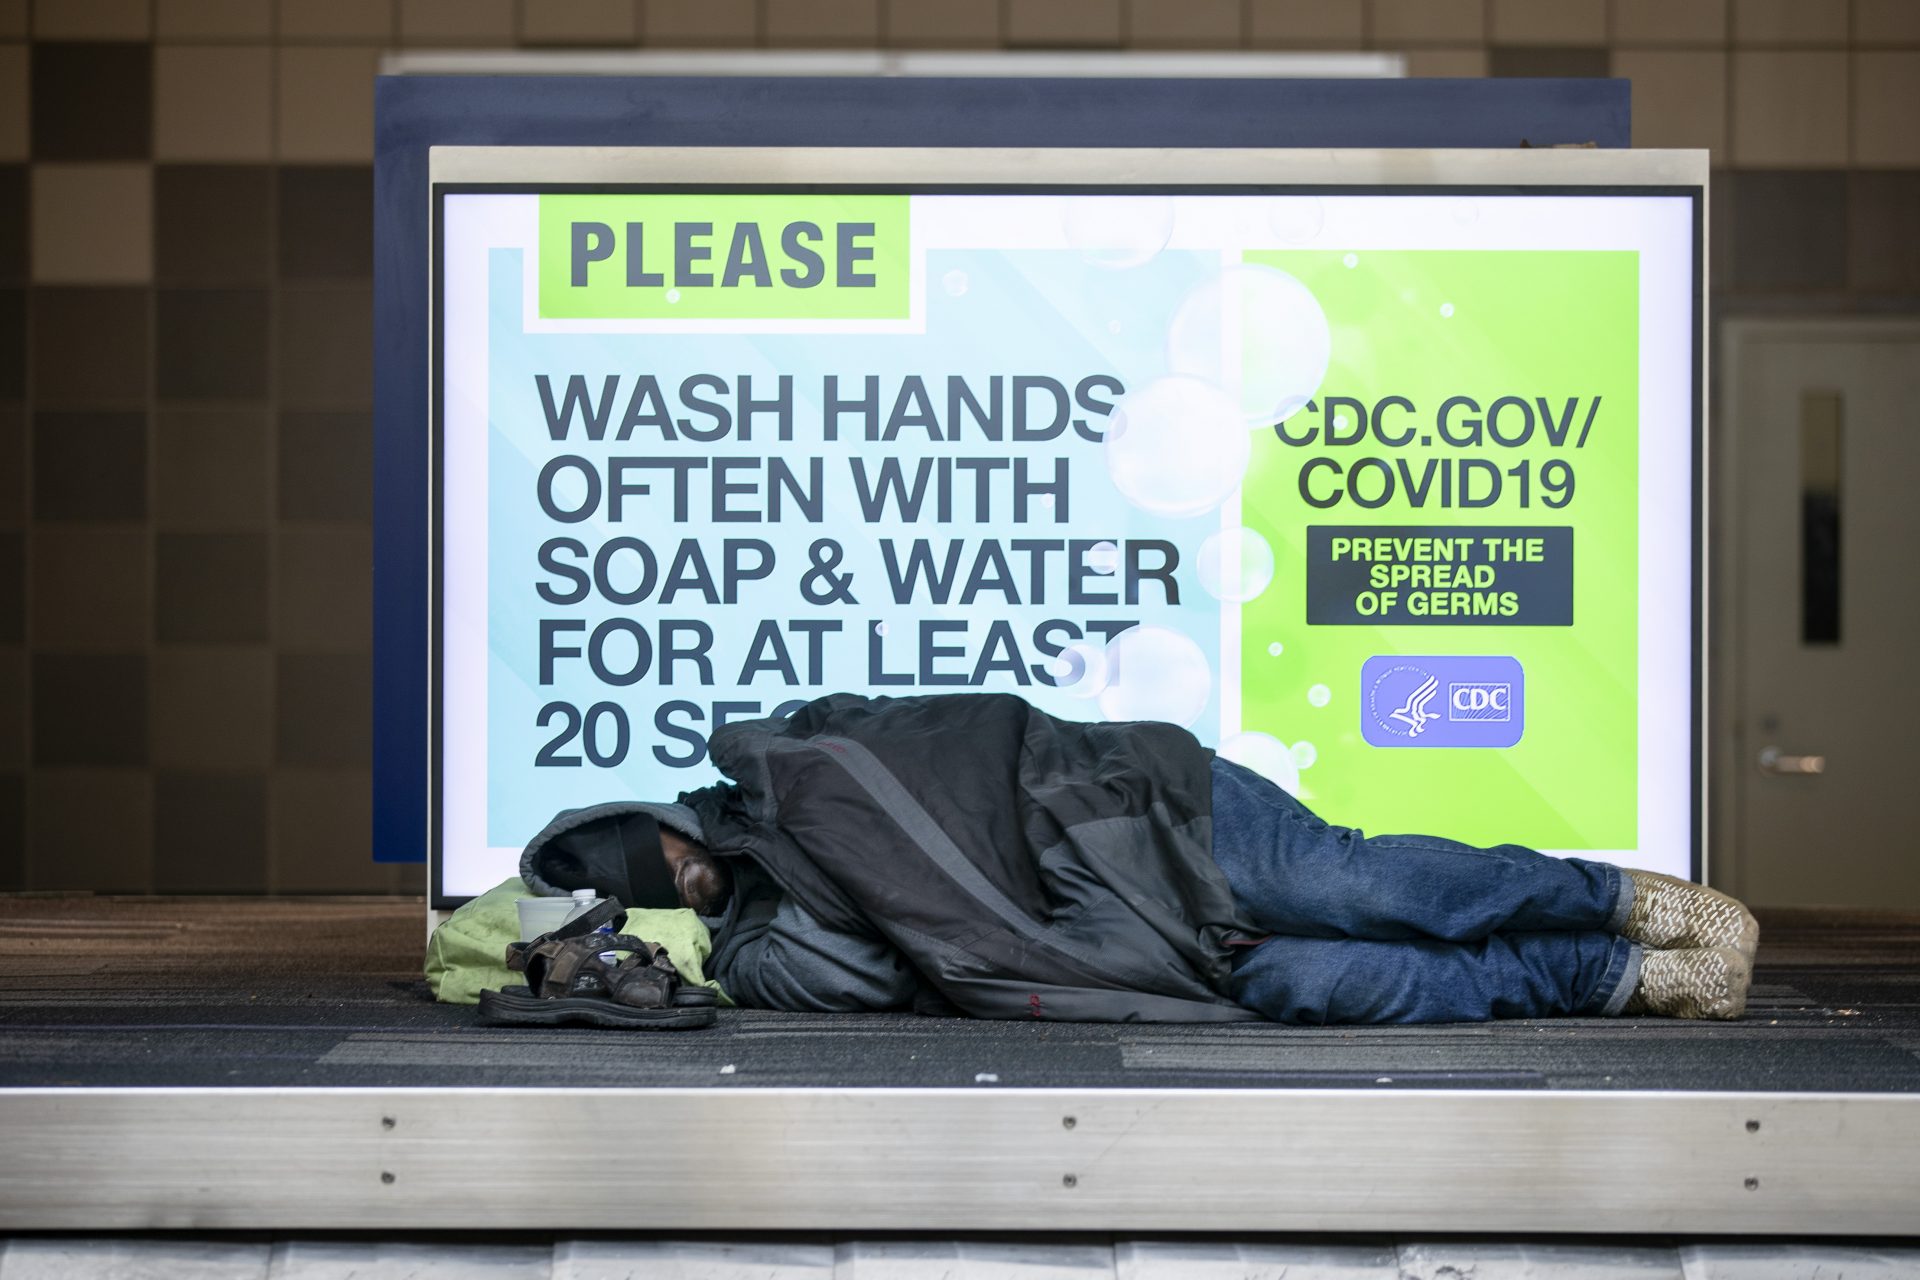 A homeless person sleeps on top of a baggage carousel at Philadelphia International Airport in Philadelphia, Monday, May 25, 2020.